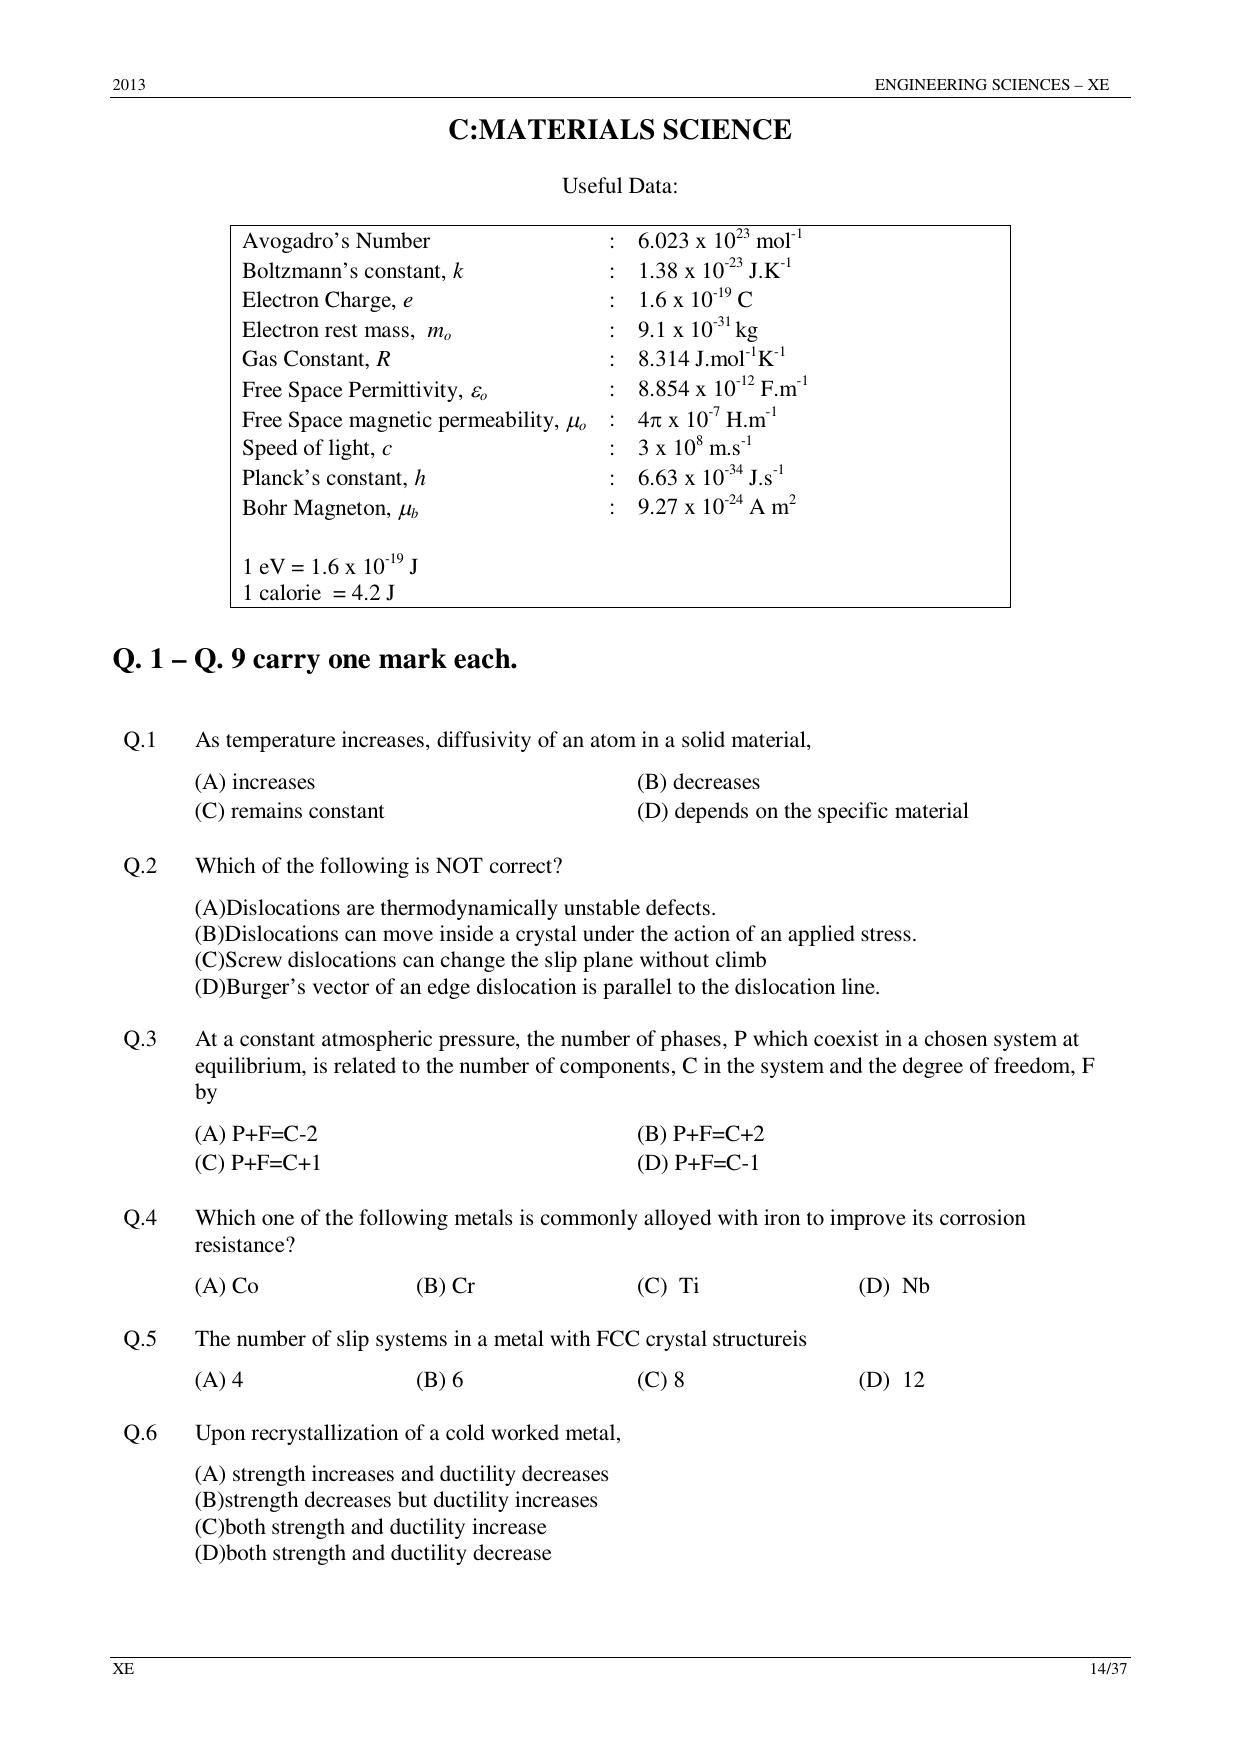 GATE 2013 Engineering Sciences (XE) Question Paper with Answer Key - Page 14